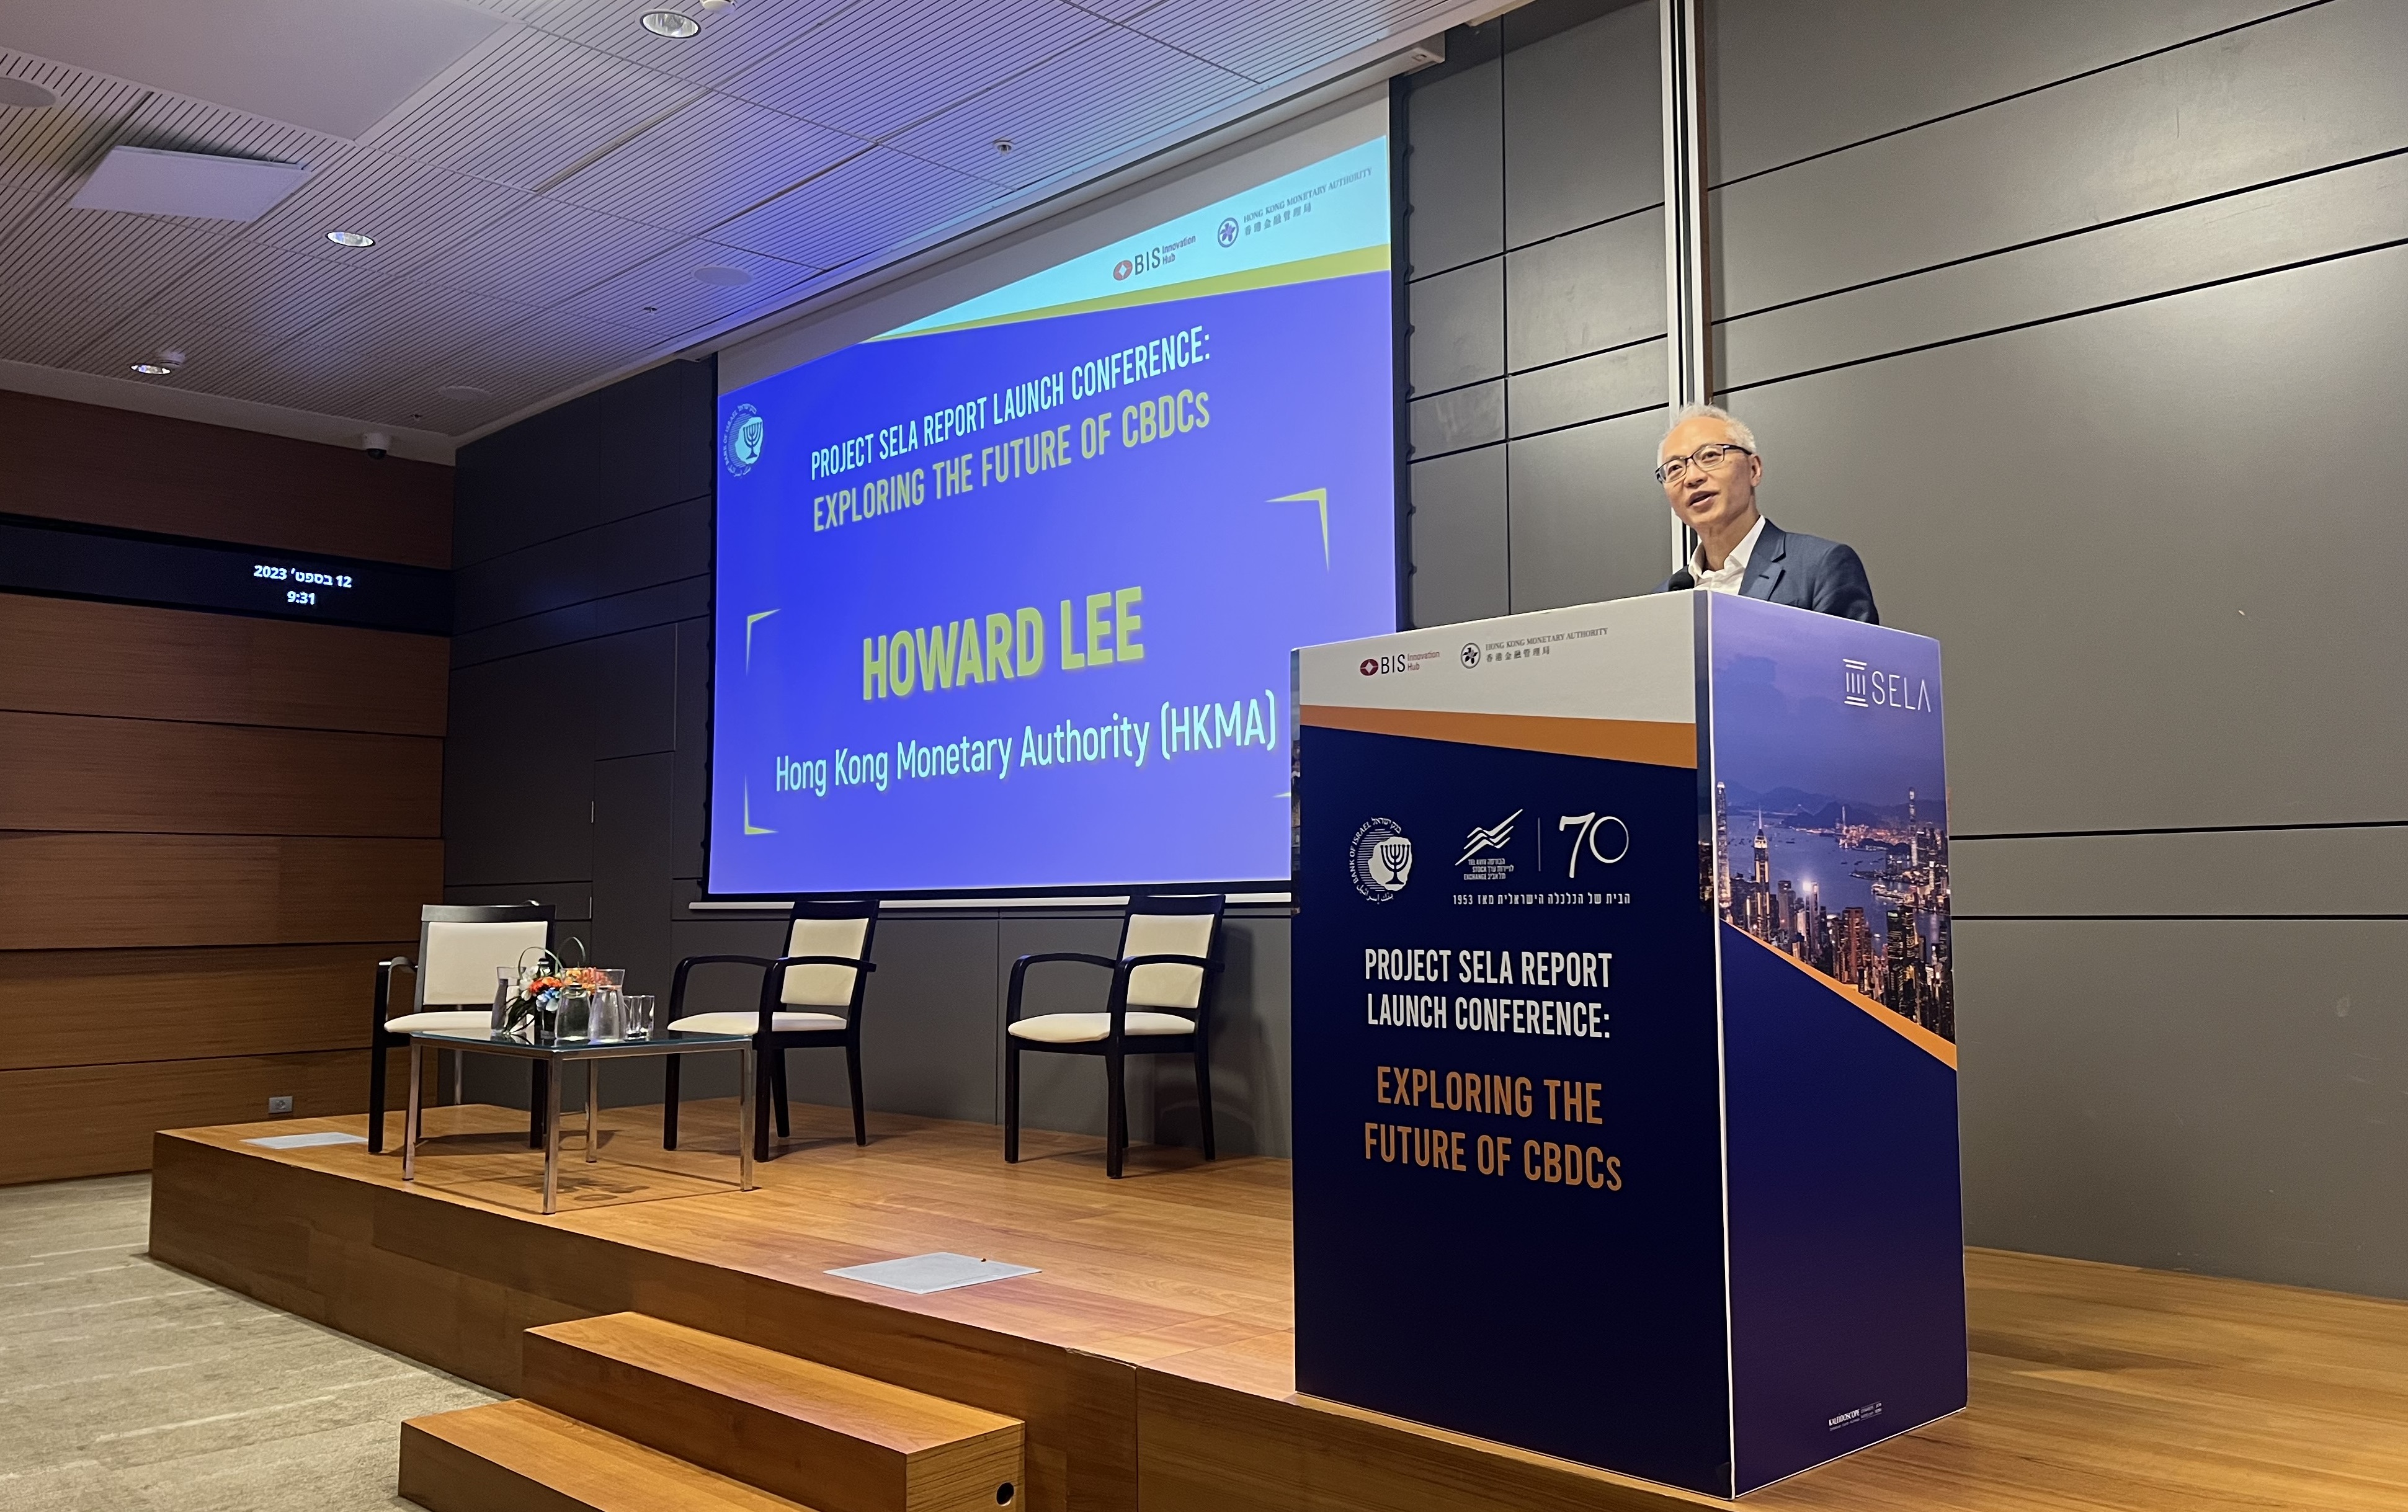 Mr Howard Lee, Deputy Chief Executive of the Hong Kong Monetary Authority, delivers opening remarks at the Project Sela Report Launch Conference.